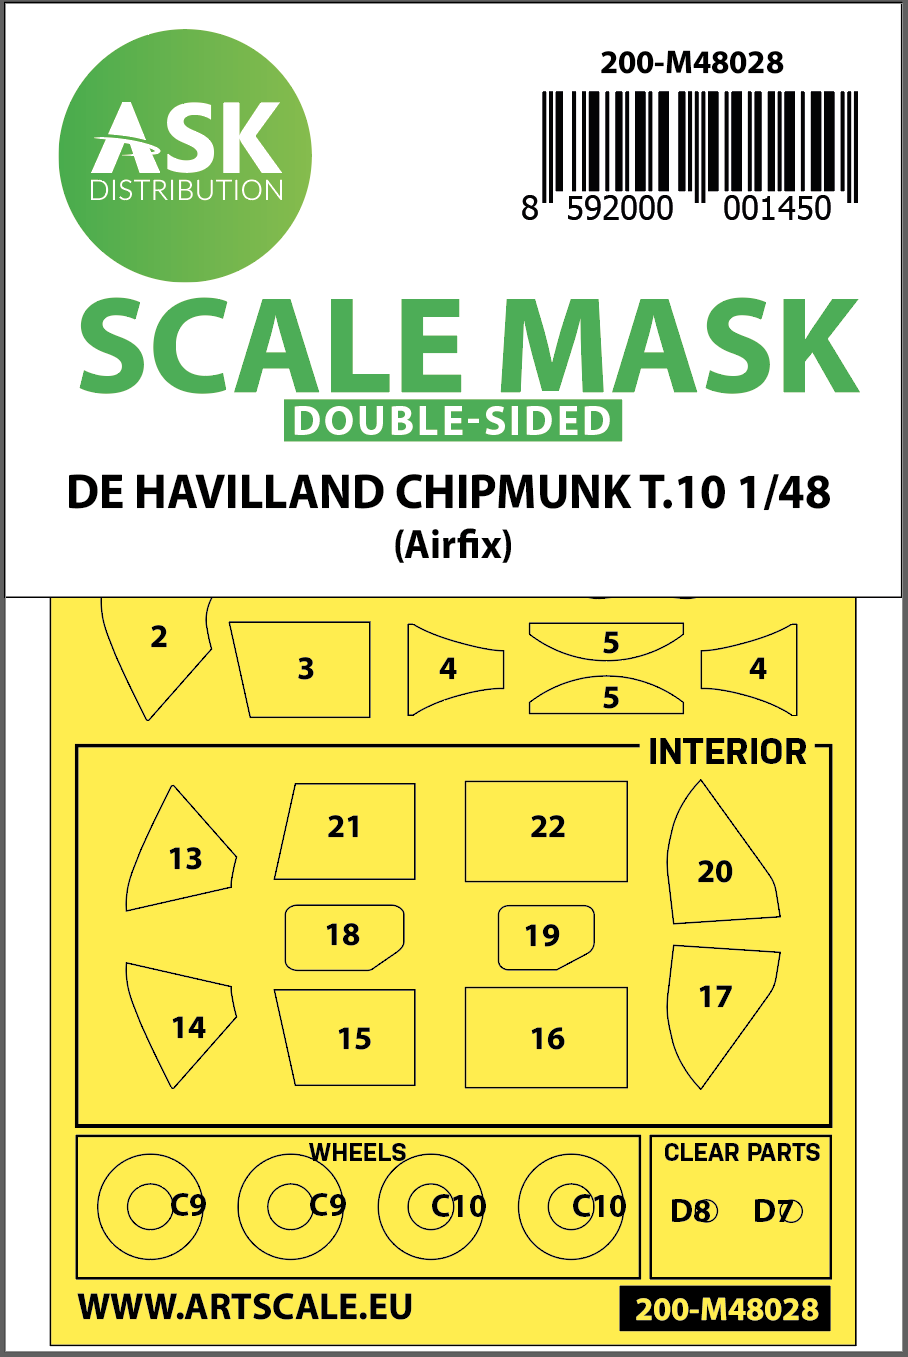 1/48 De Havilland Chipmunk T.10 double-sided painting mask for Airfix